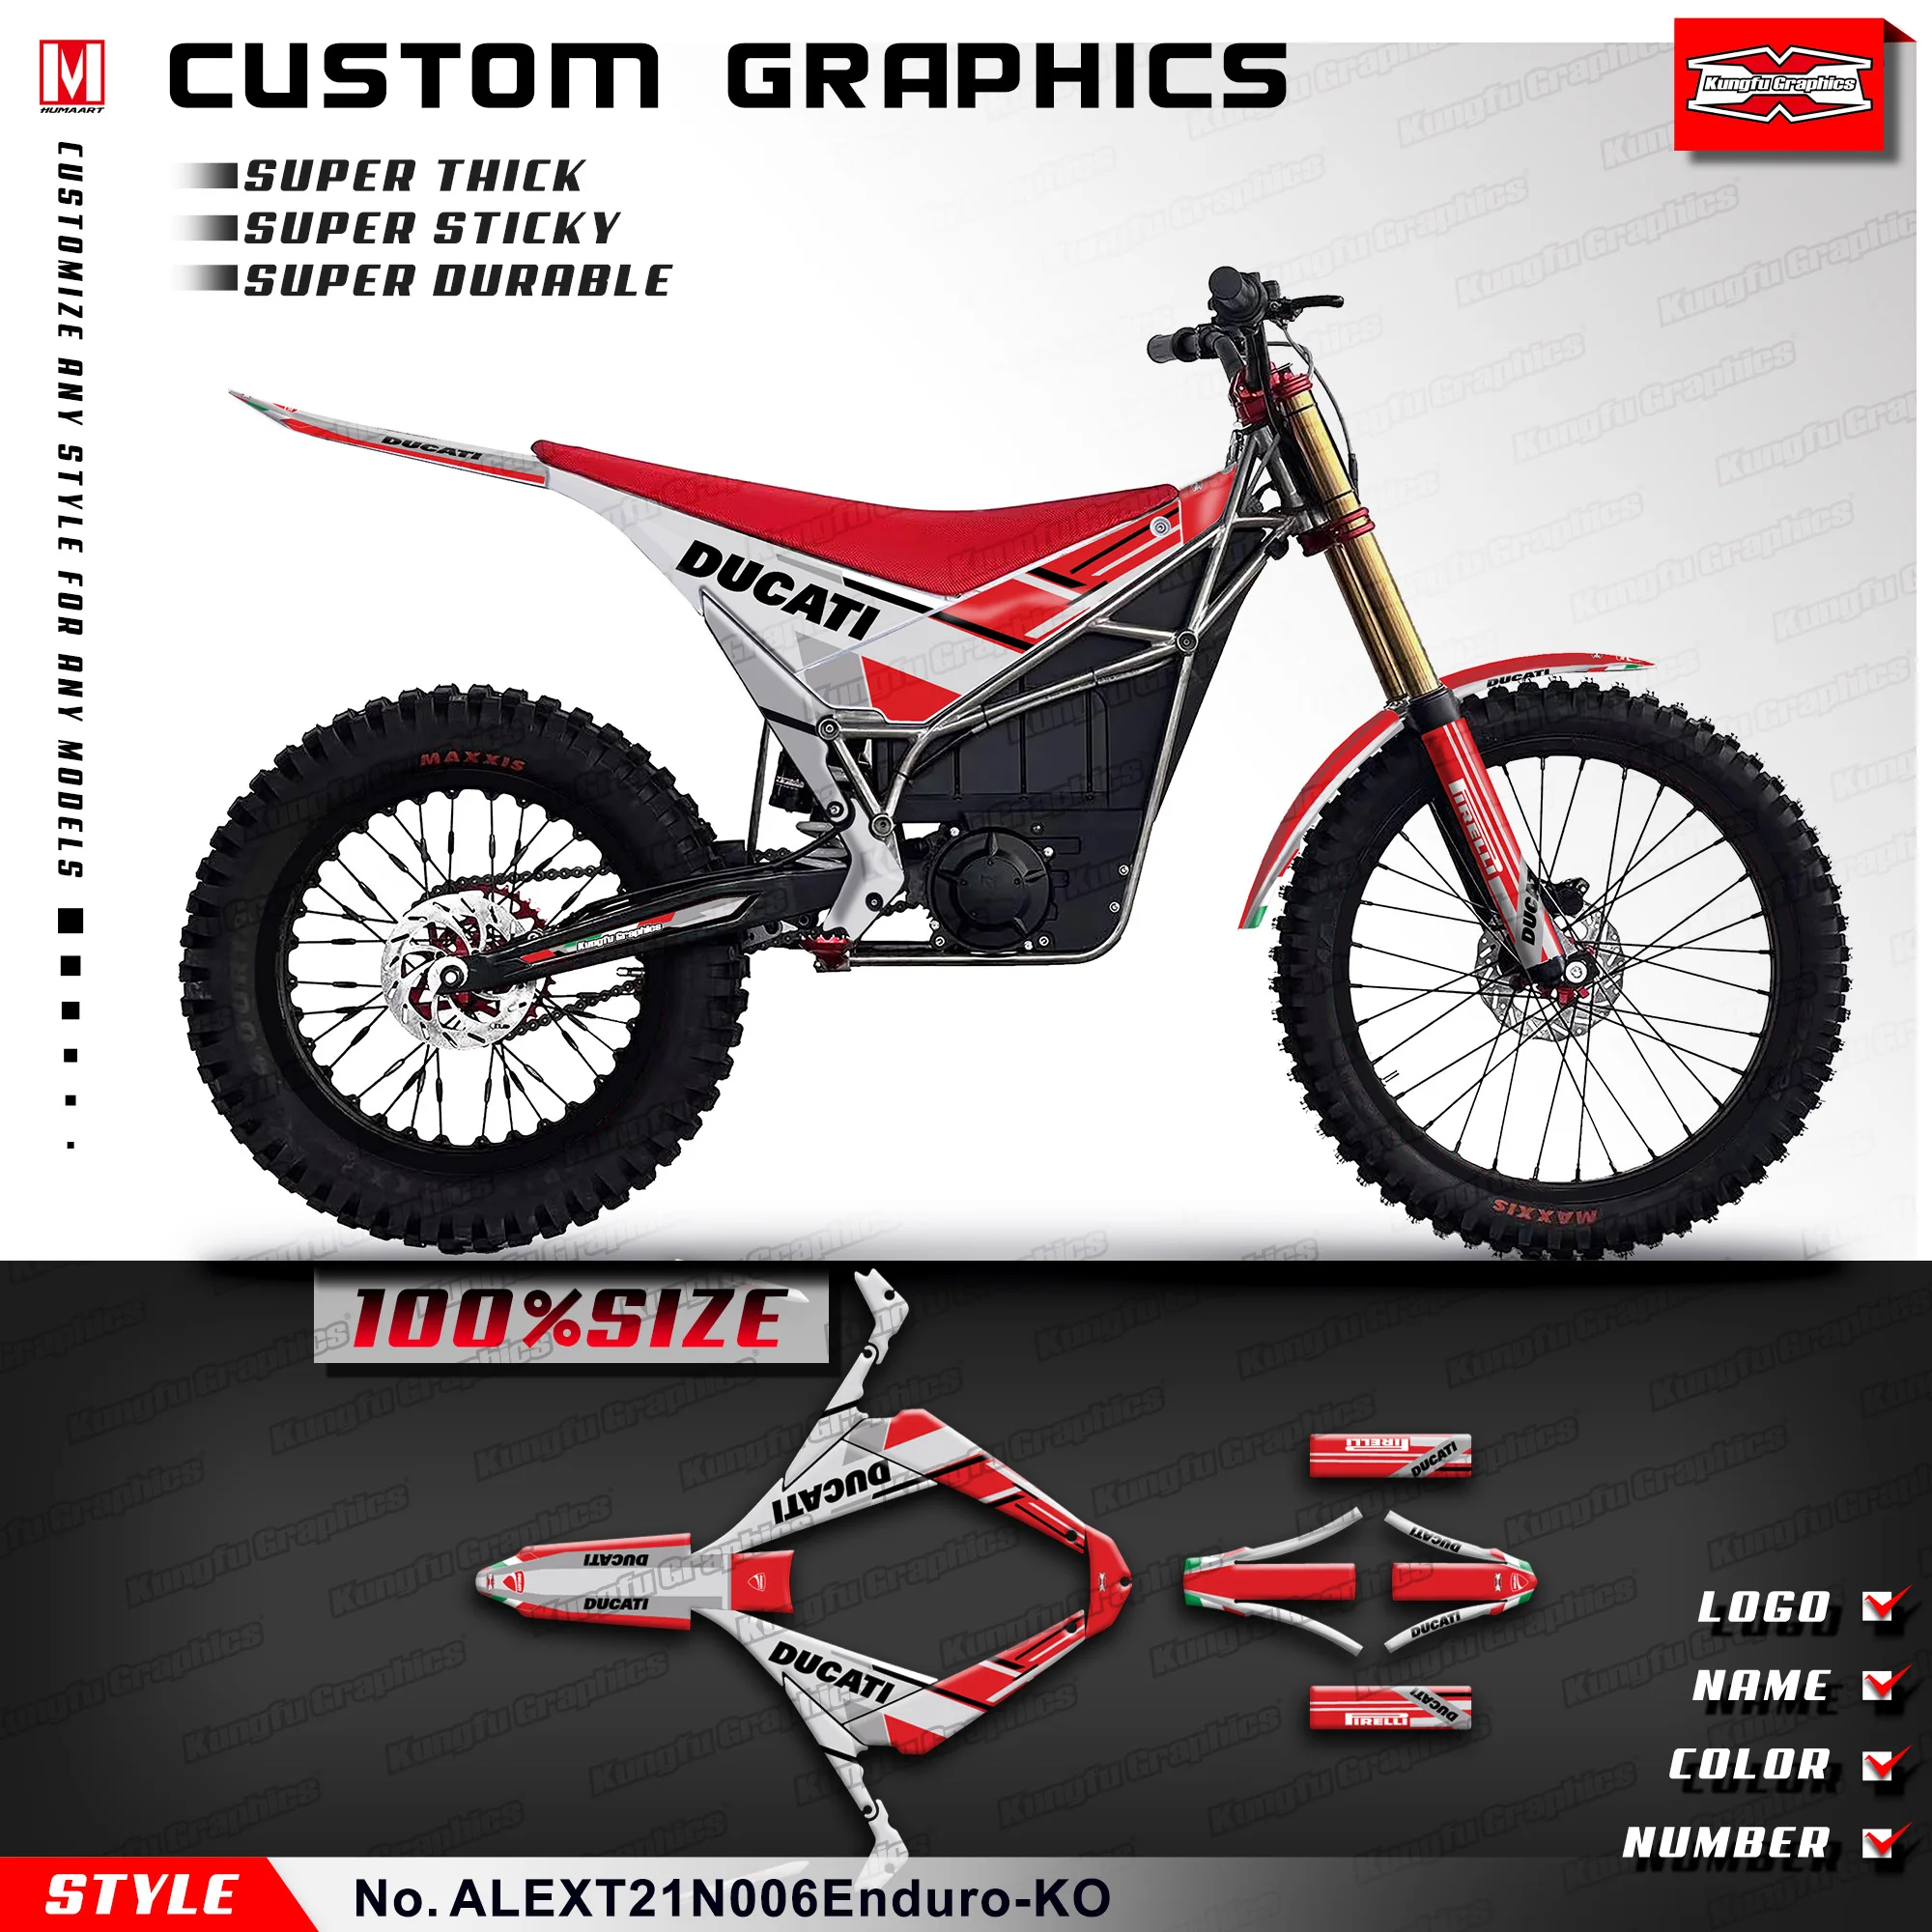 

KUNGFU GRAPHICS Off Road Sticker Custom Decal Full Wrap Kit for Arctic Leopard E-XT Trial Enduro Electric Dirt Bike, Red Grey